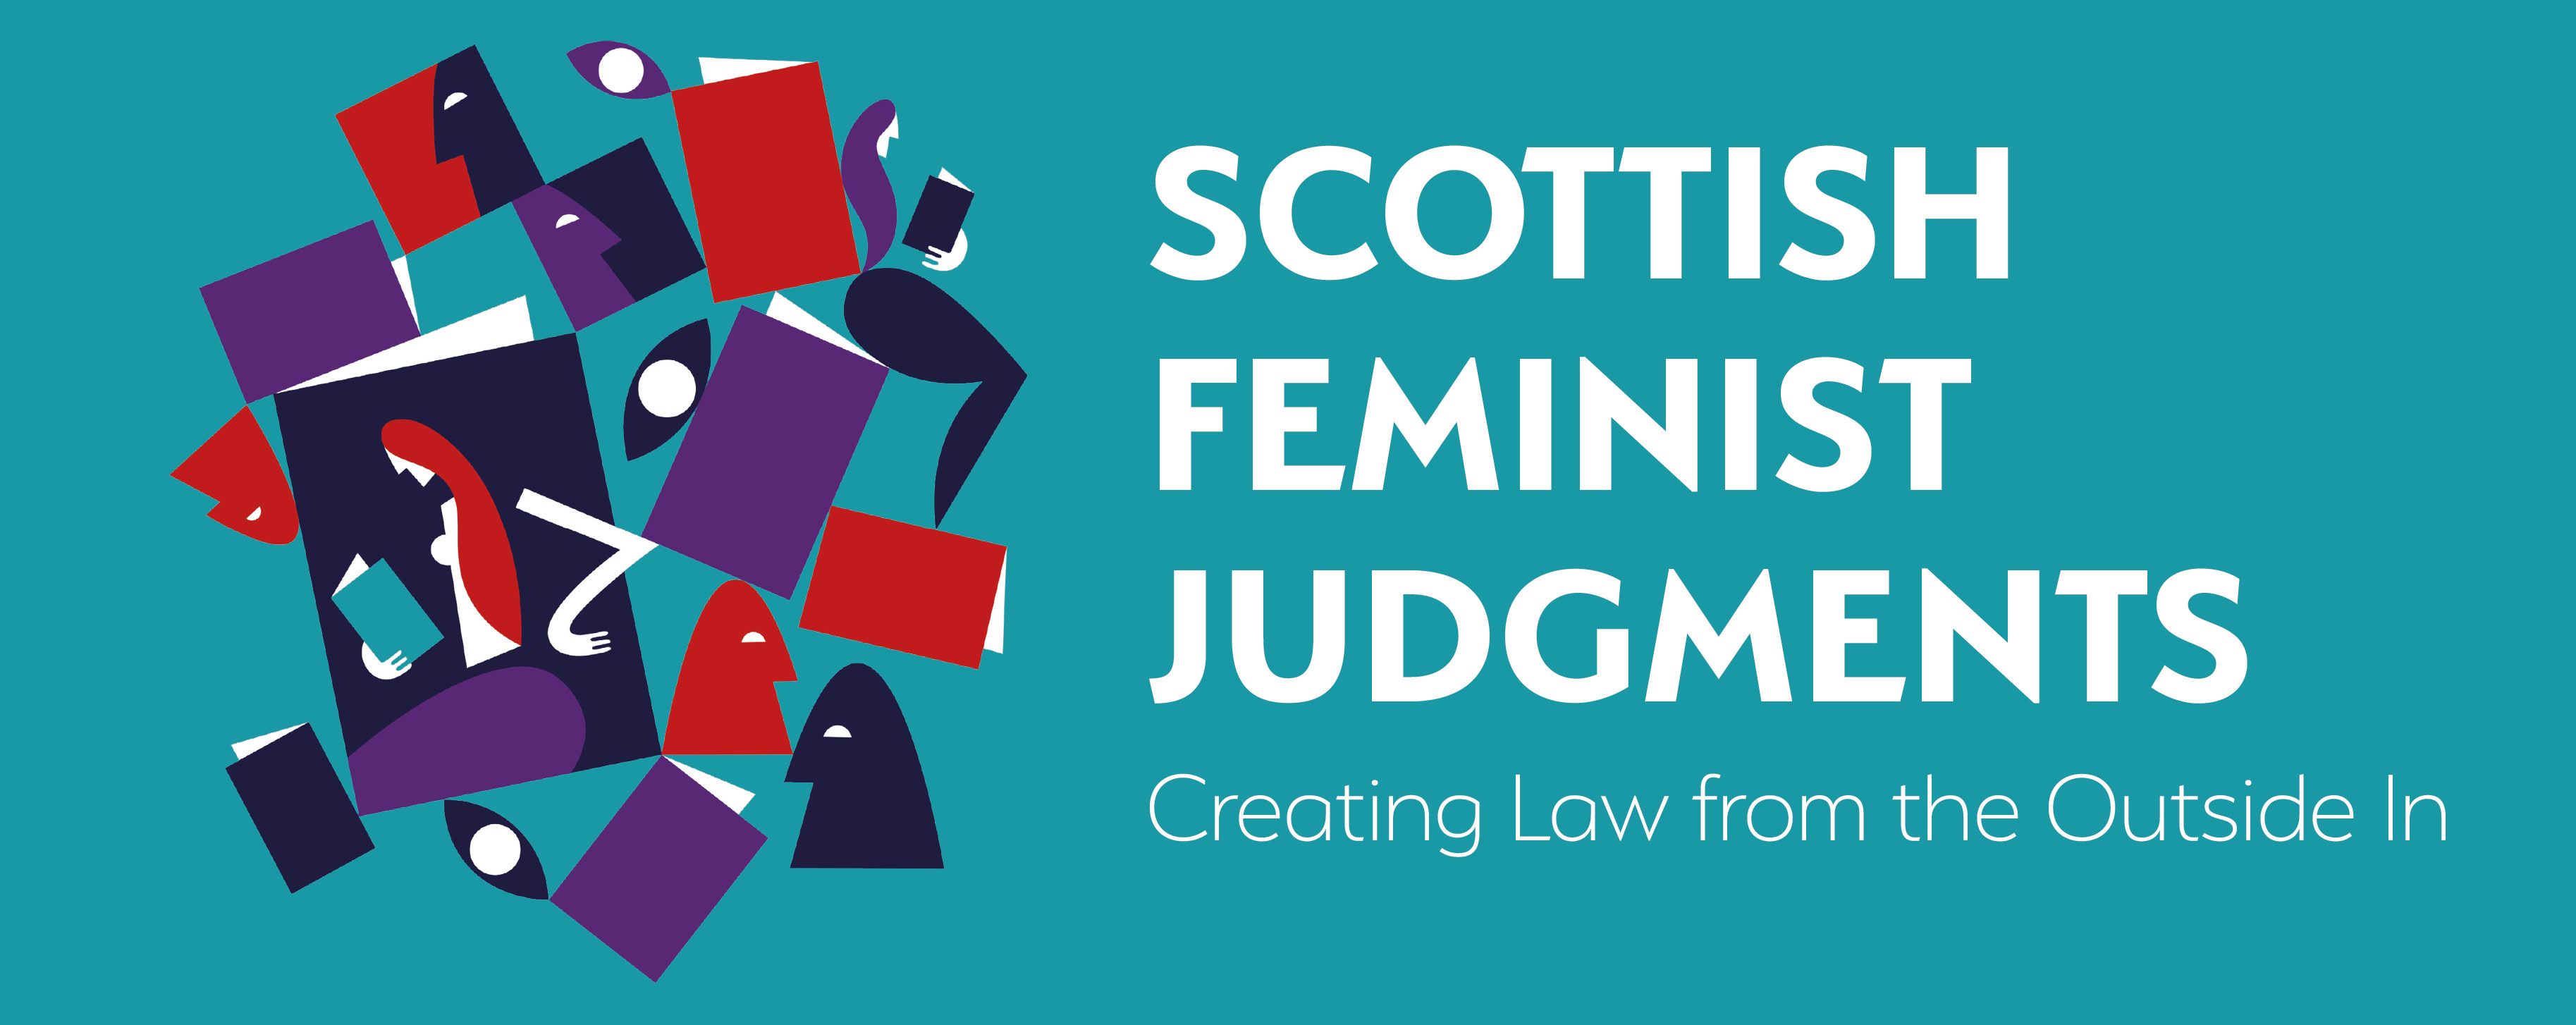 Scottish Feminist Judgments Project launches podcast